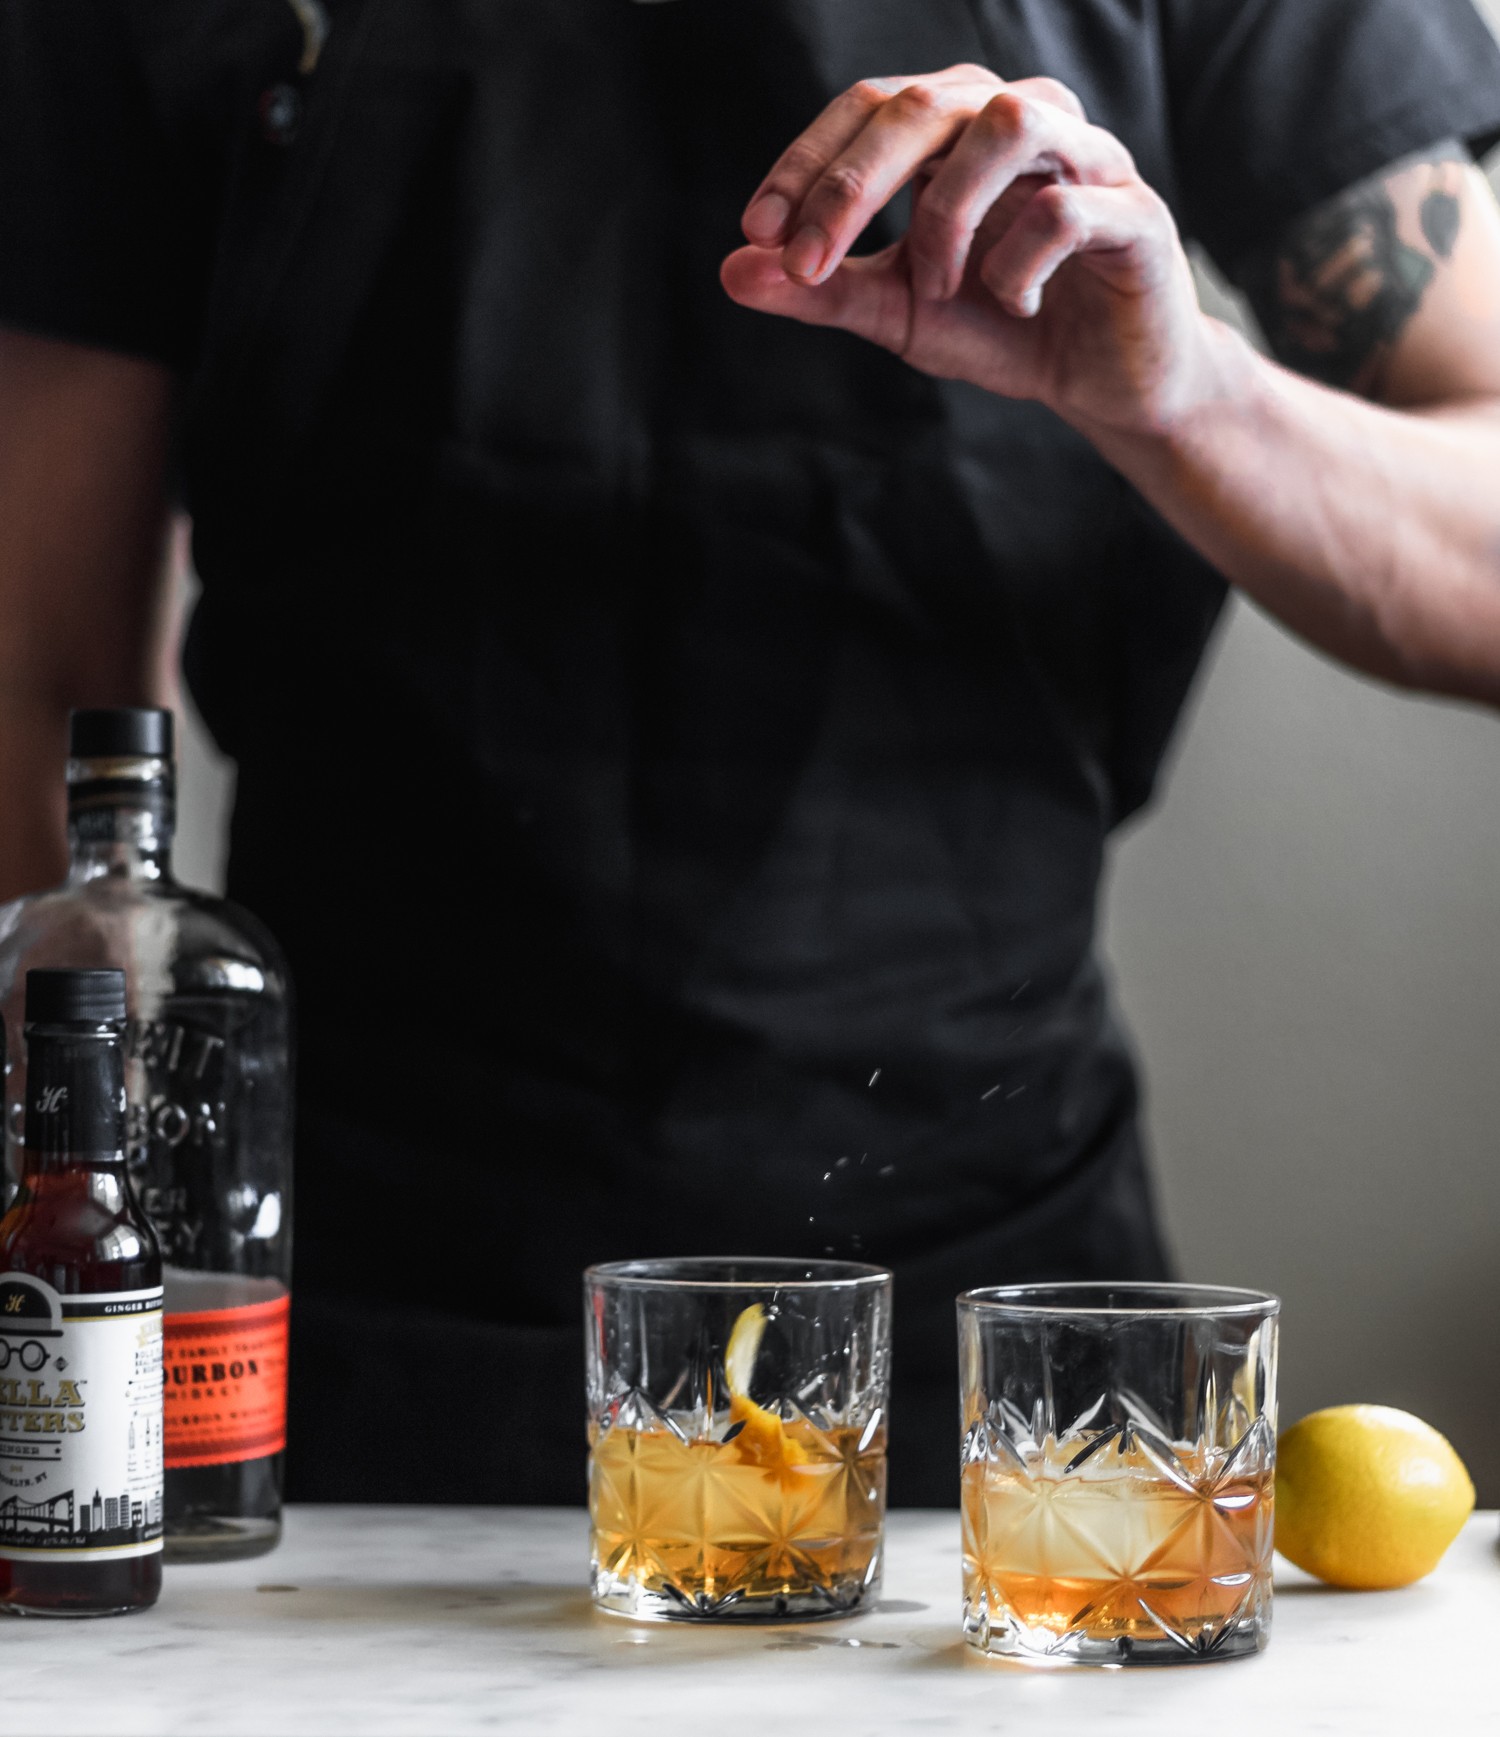 A side image of a man wearing a black apron dropping a lemon peel into a whiskey cocktail on a marble counter next to a bottle of whiskey and bottle of bitters.